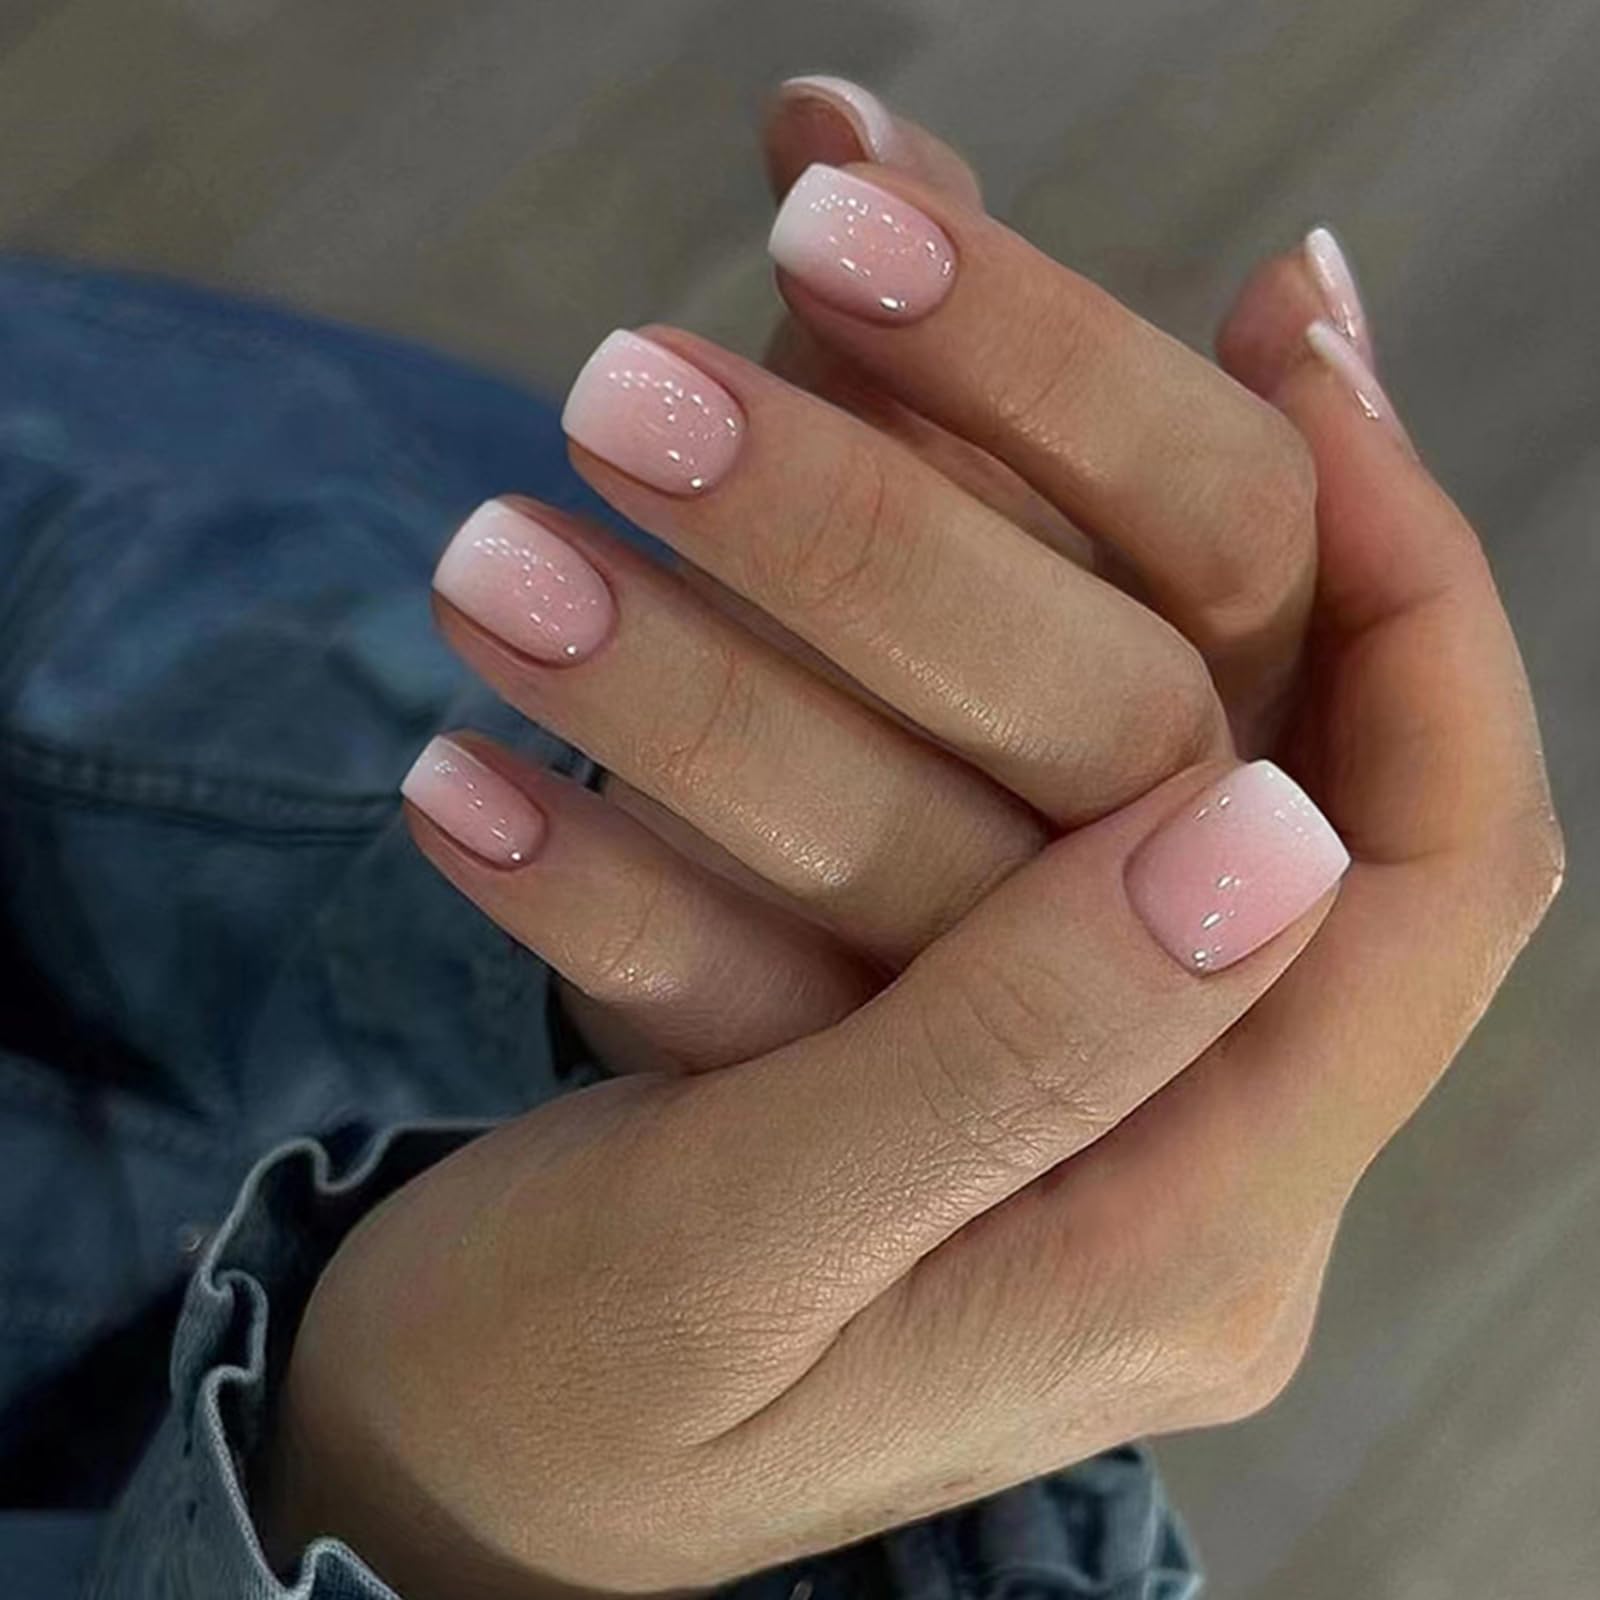 Classic Long French Manicure Stick On Nails – www.pipabella.com